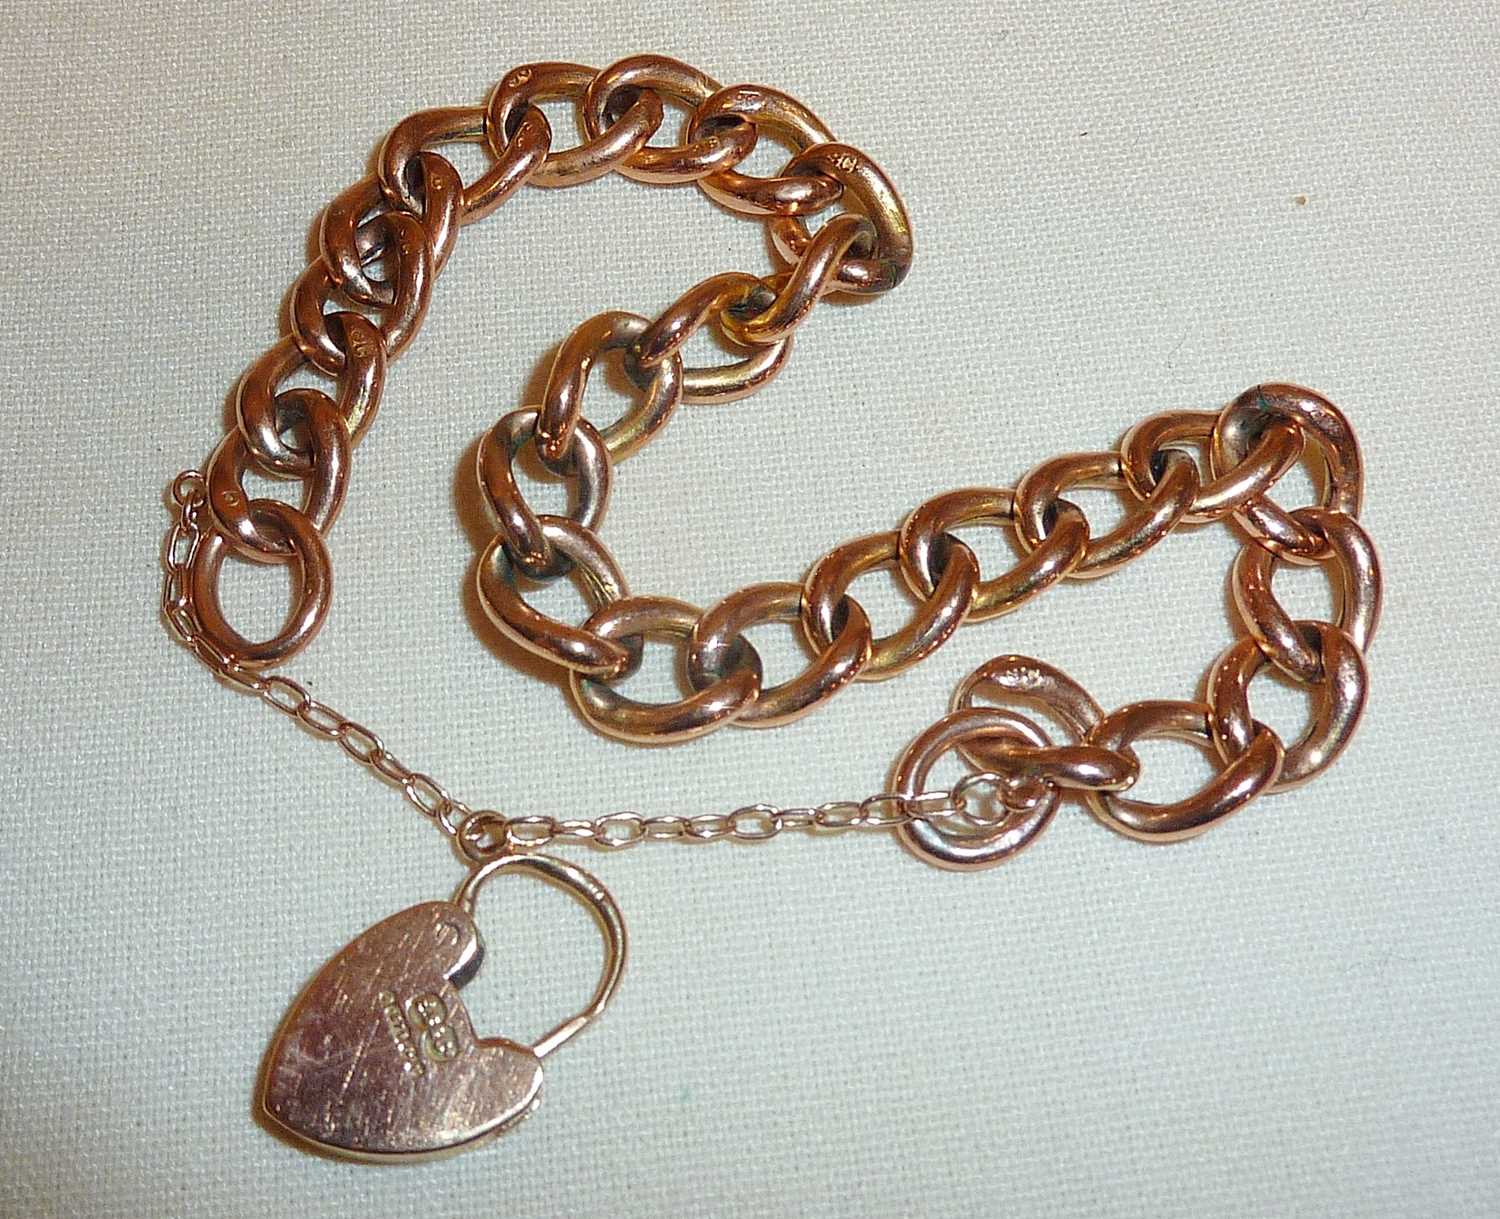 9ct rose gold belcher chain bracelet with padlock clasp in velvet case, approx. 8.5g - Image 2 of 2